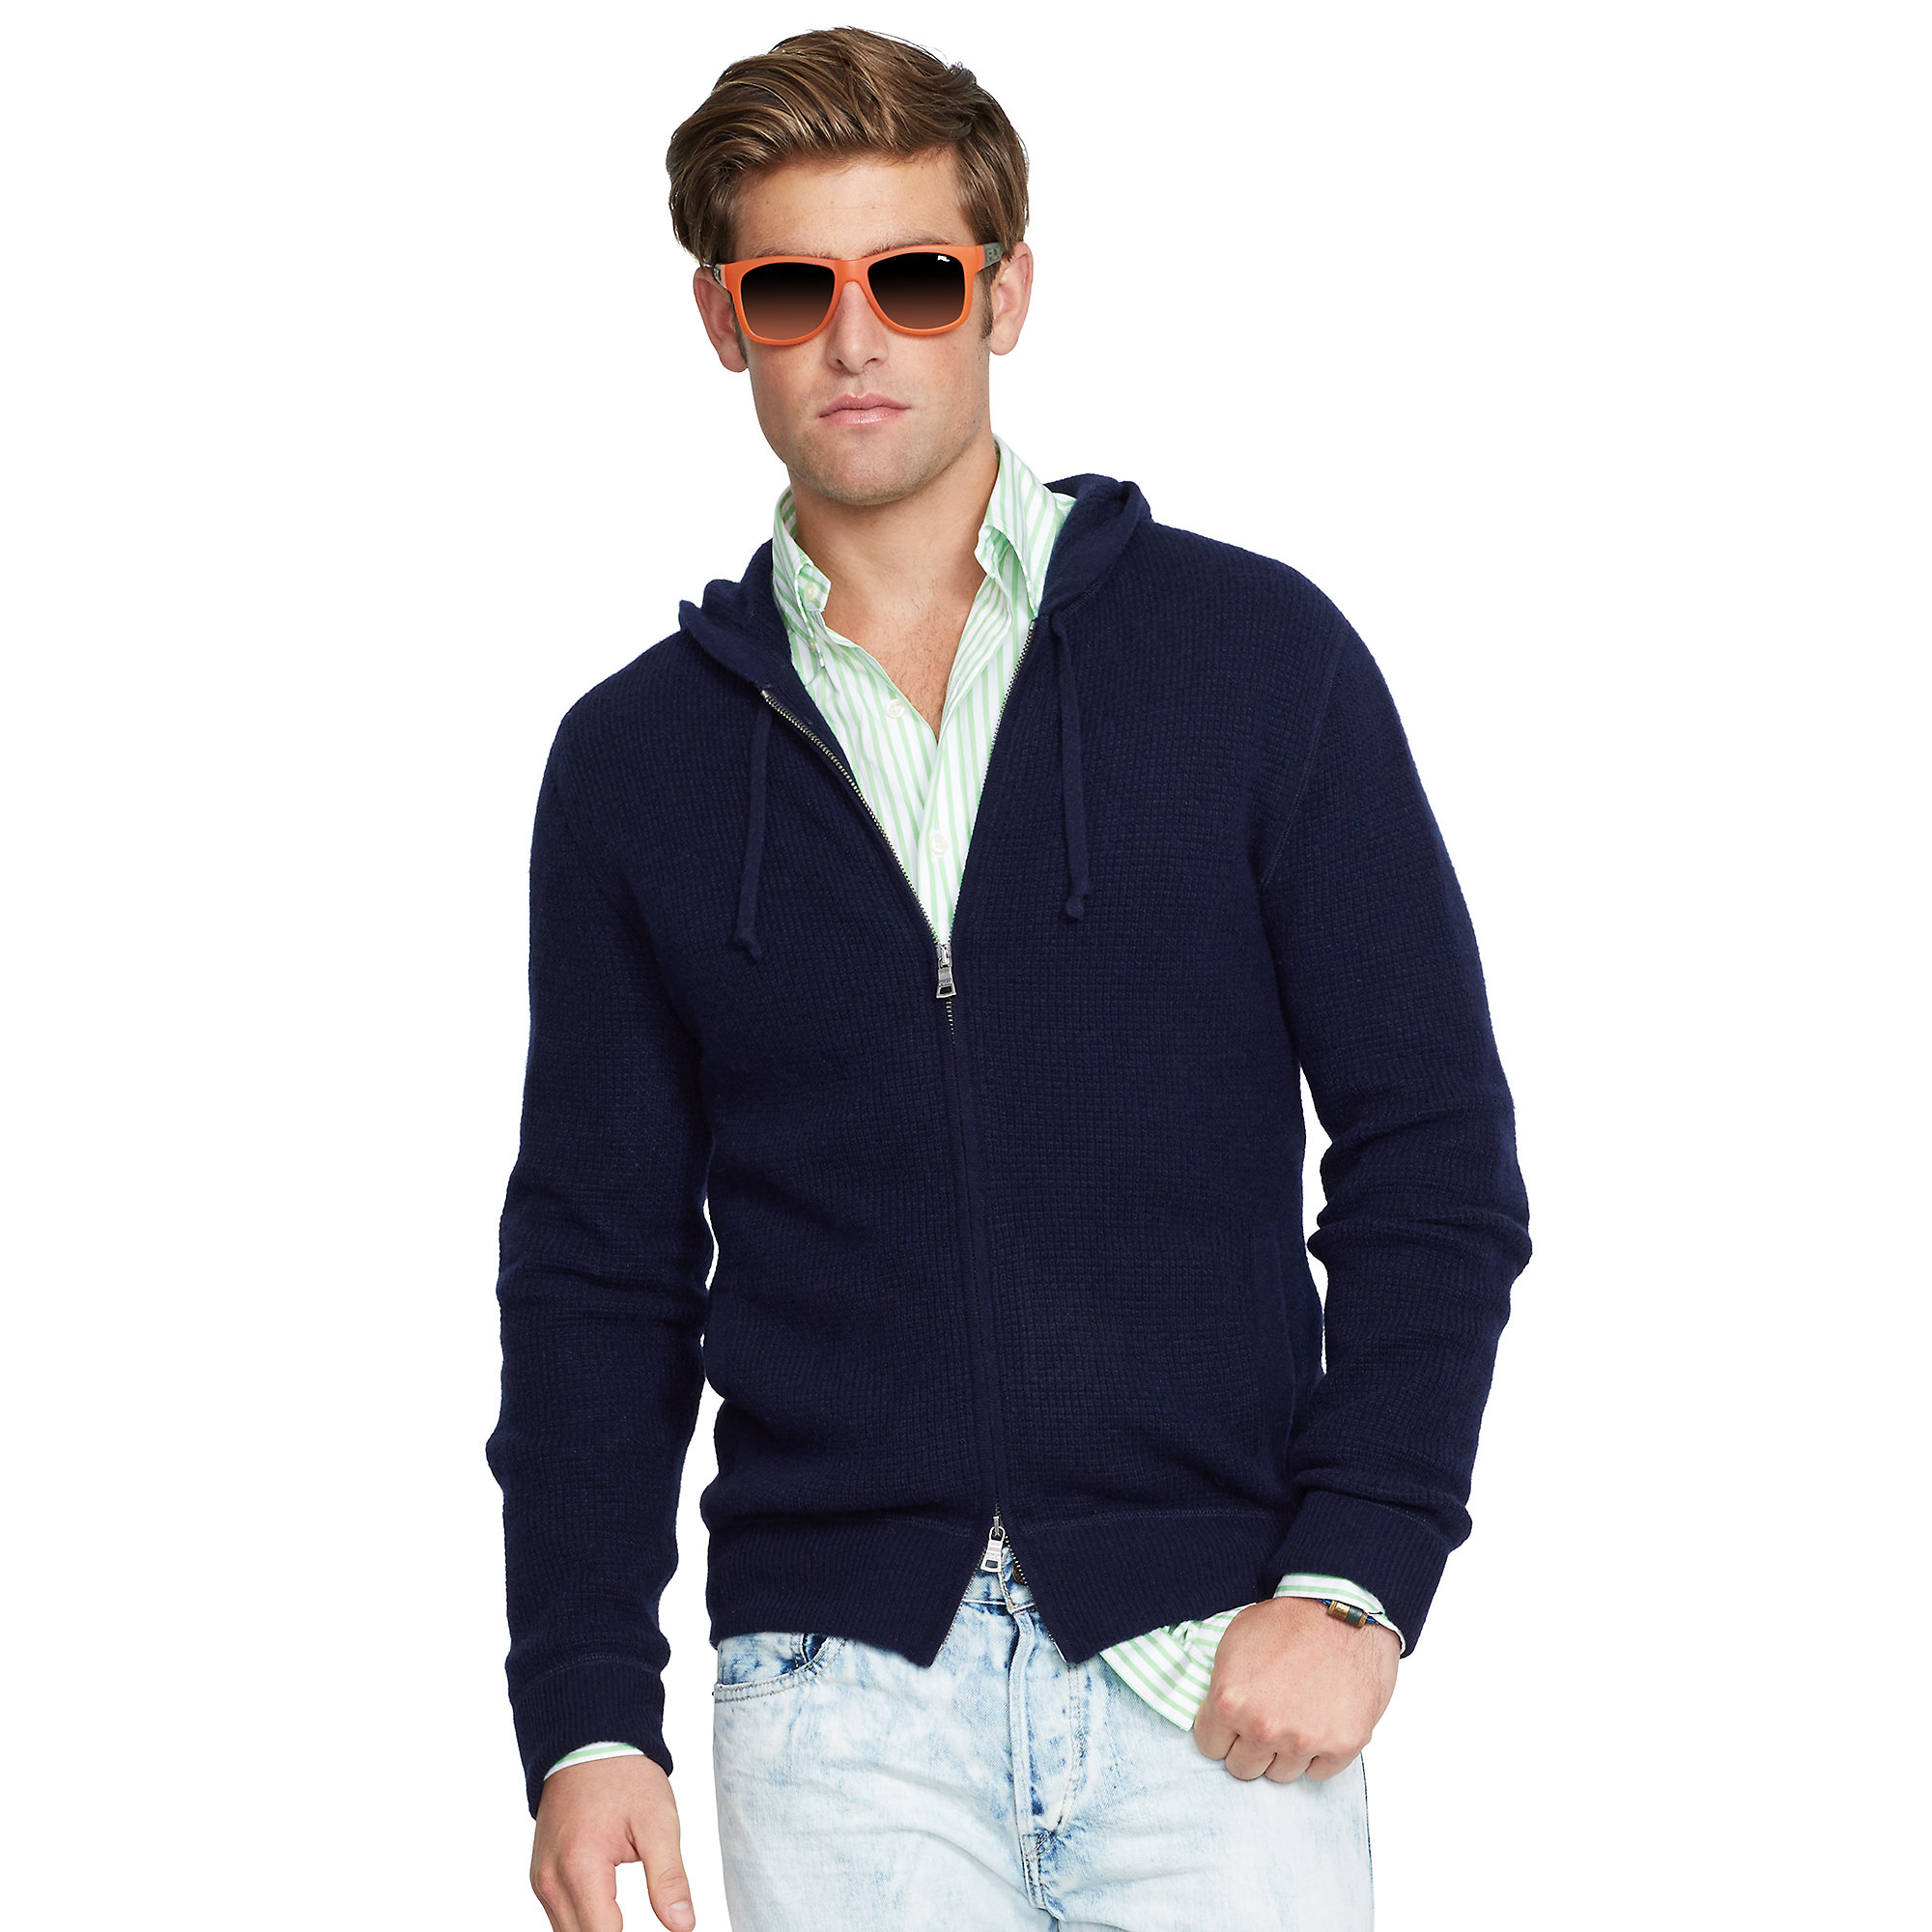 Lyst - Polo Ralph Lauren Waffle-Knit Cashmere Hoodie in Blue for Men